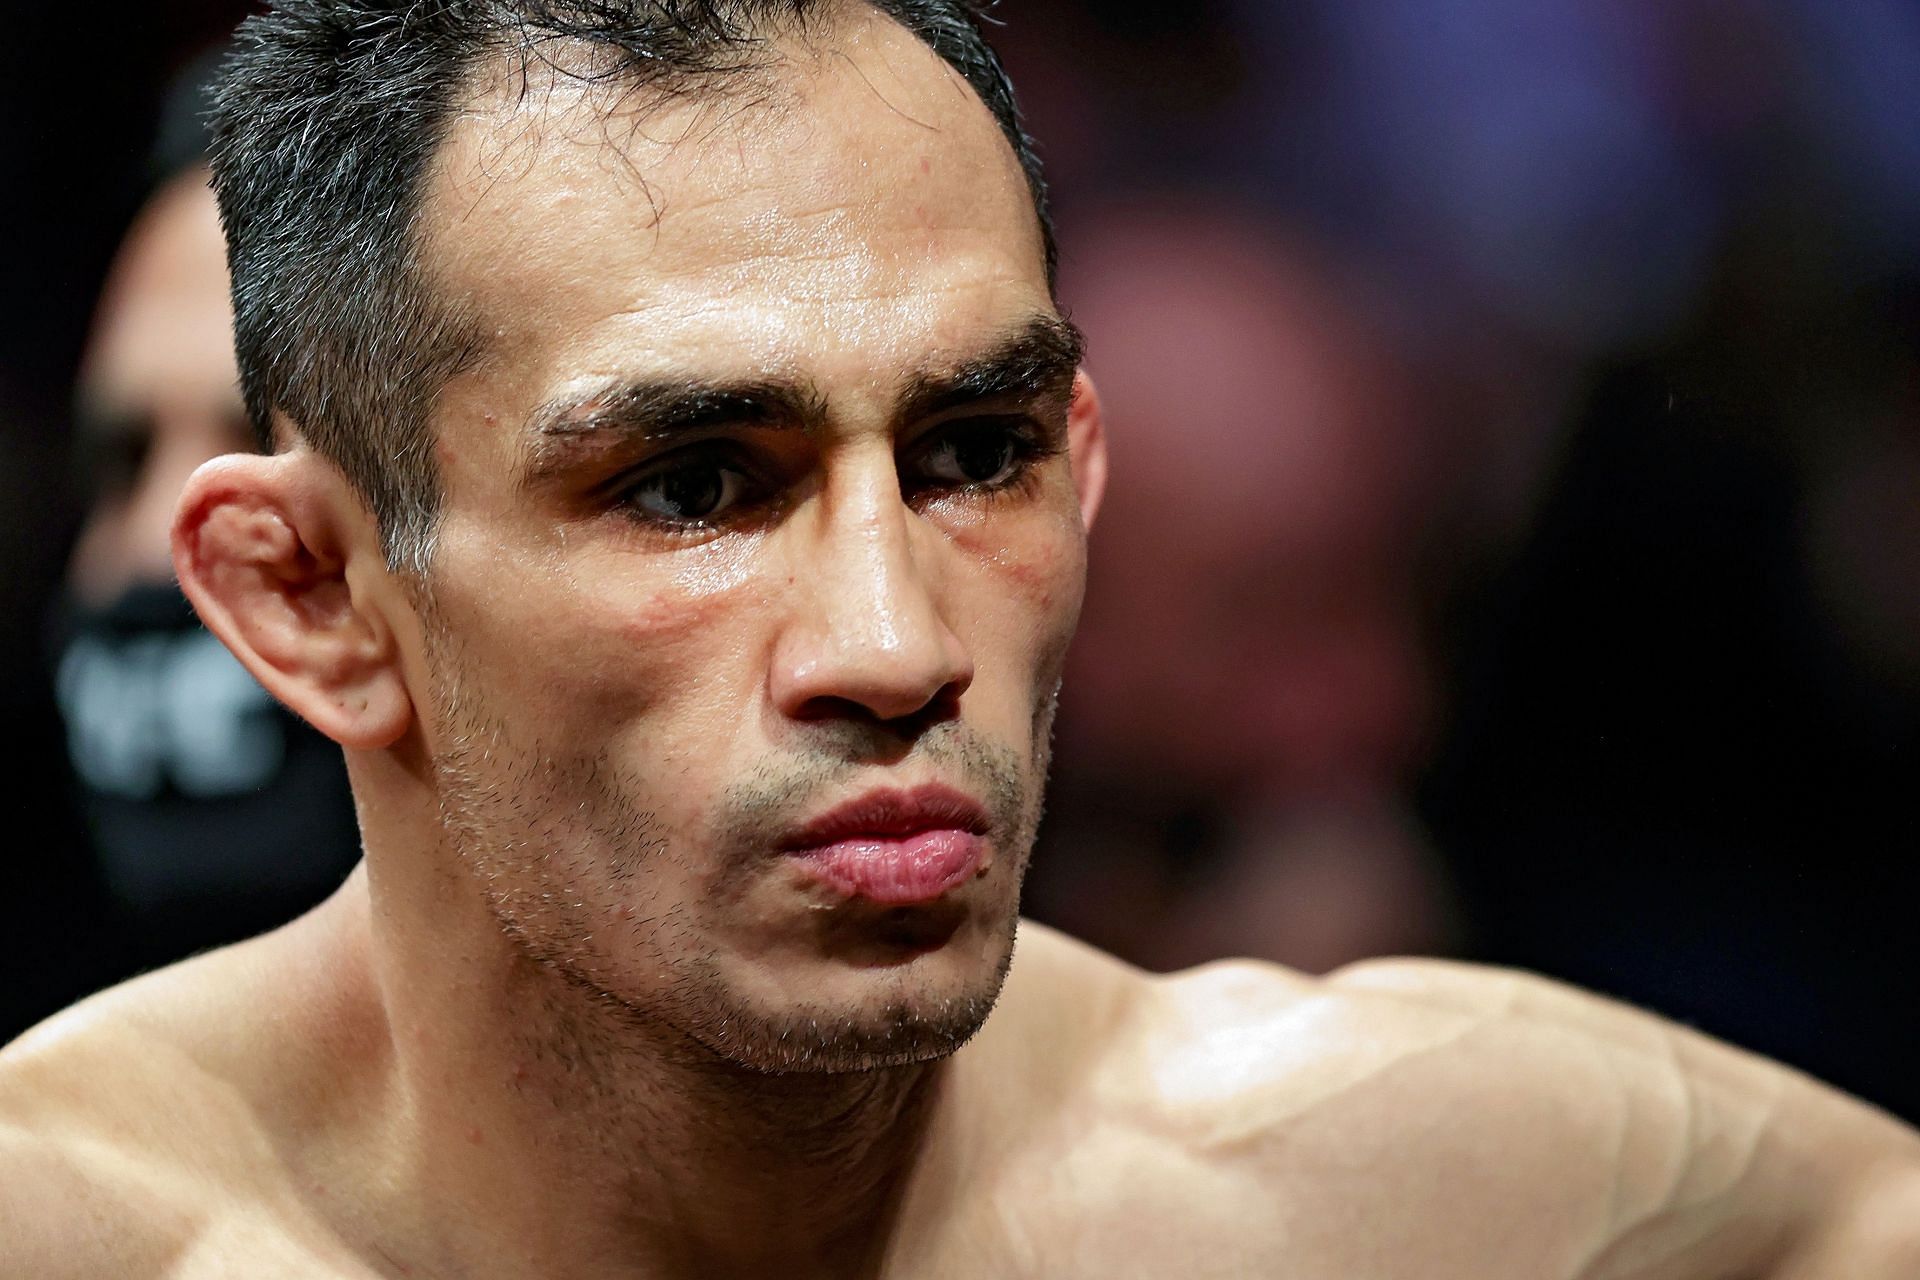 After winning TUF 13, Tony Ferguson became one of the best lightweights of his generation